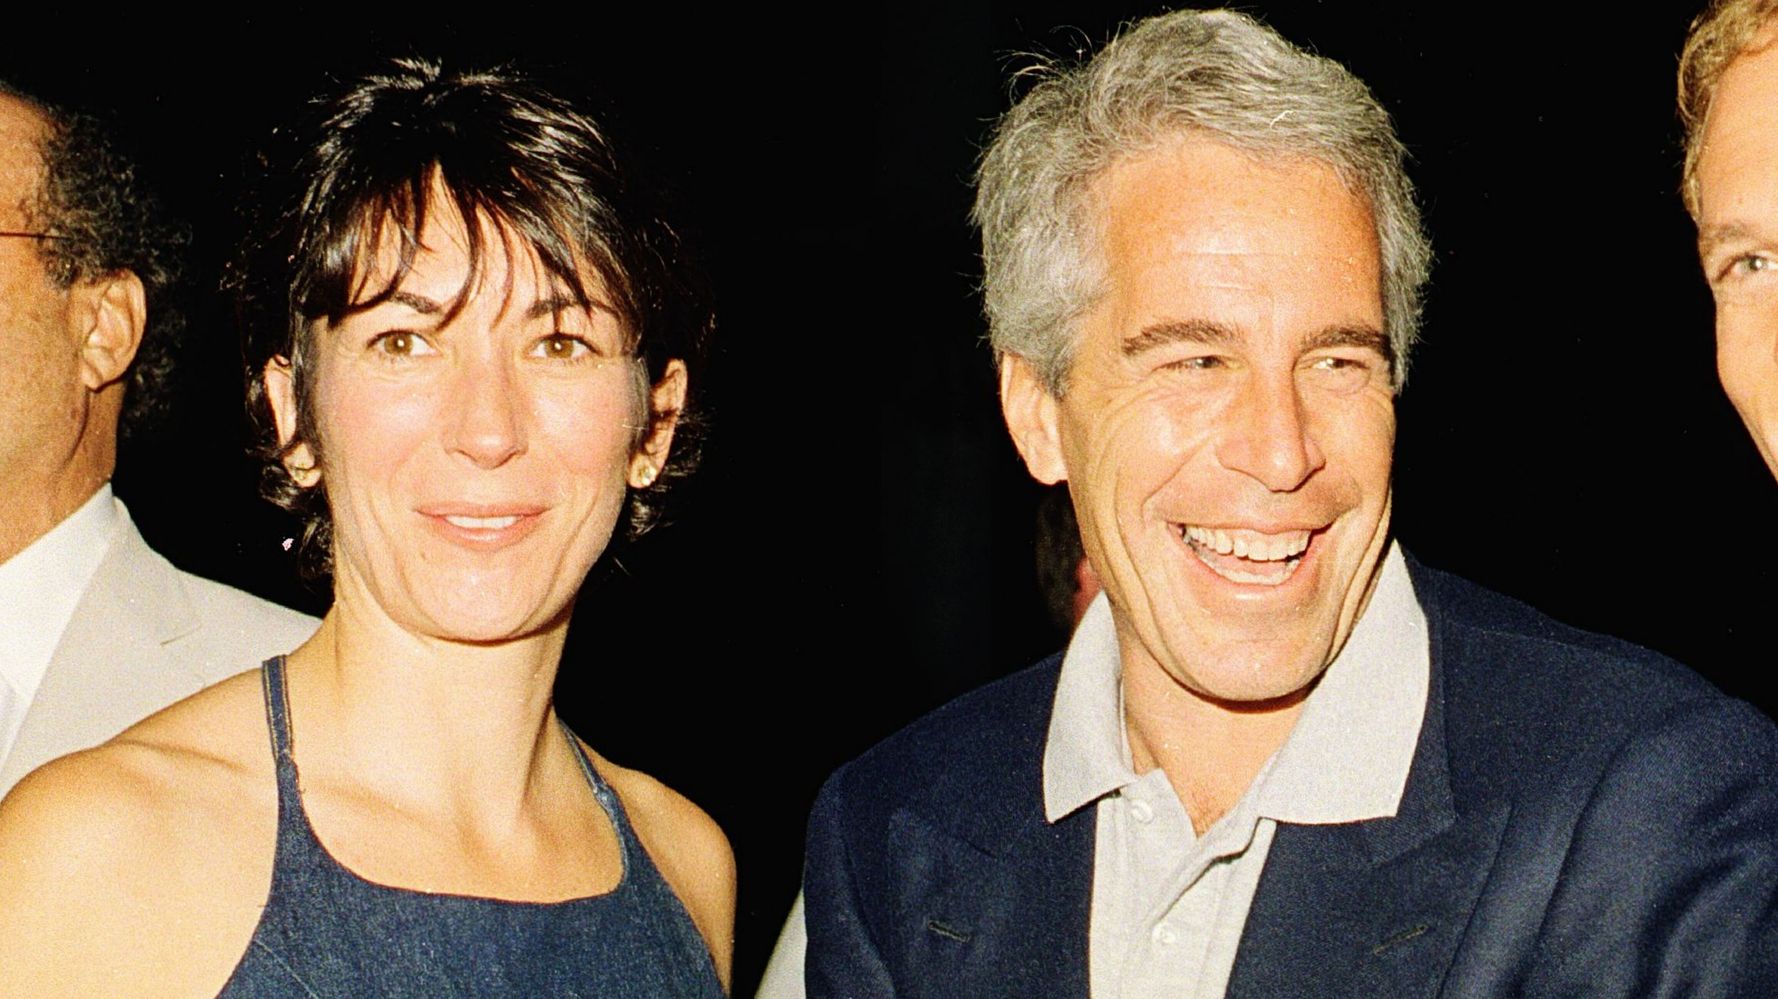 London Police To 'Review' UK Allegations Against Jeffrey Epstein, Ghislaine Maxwell